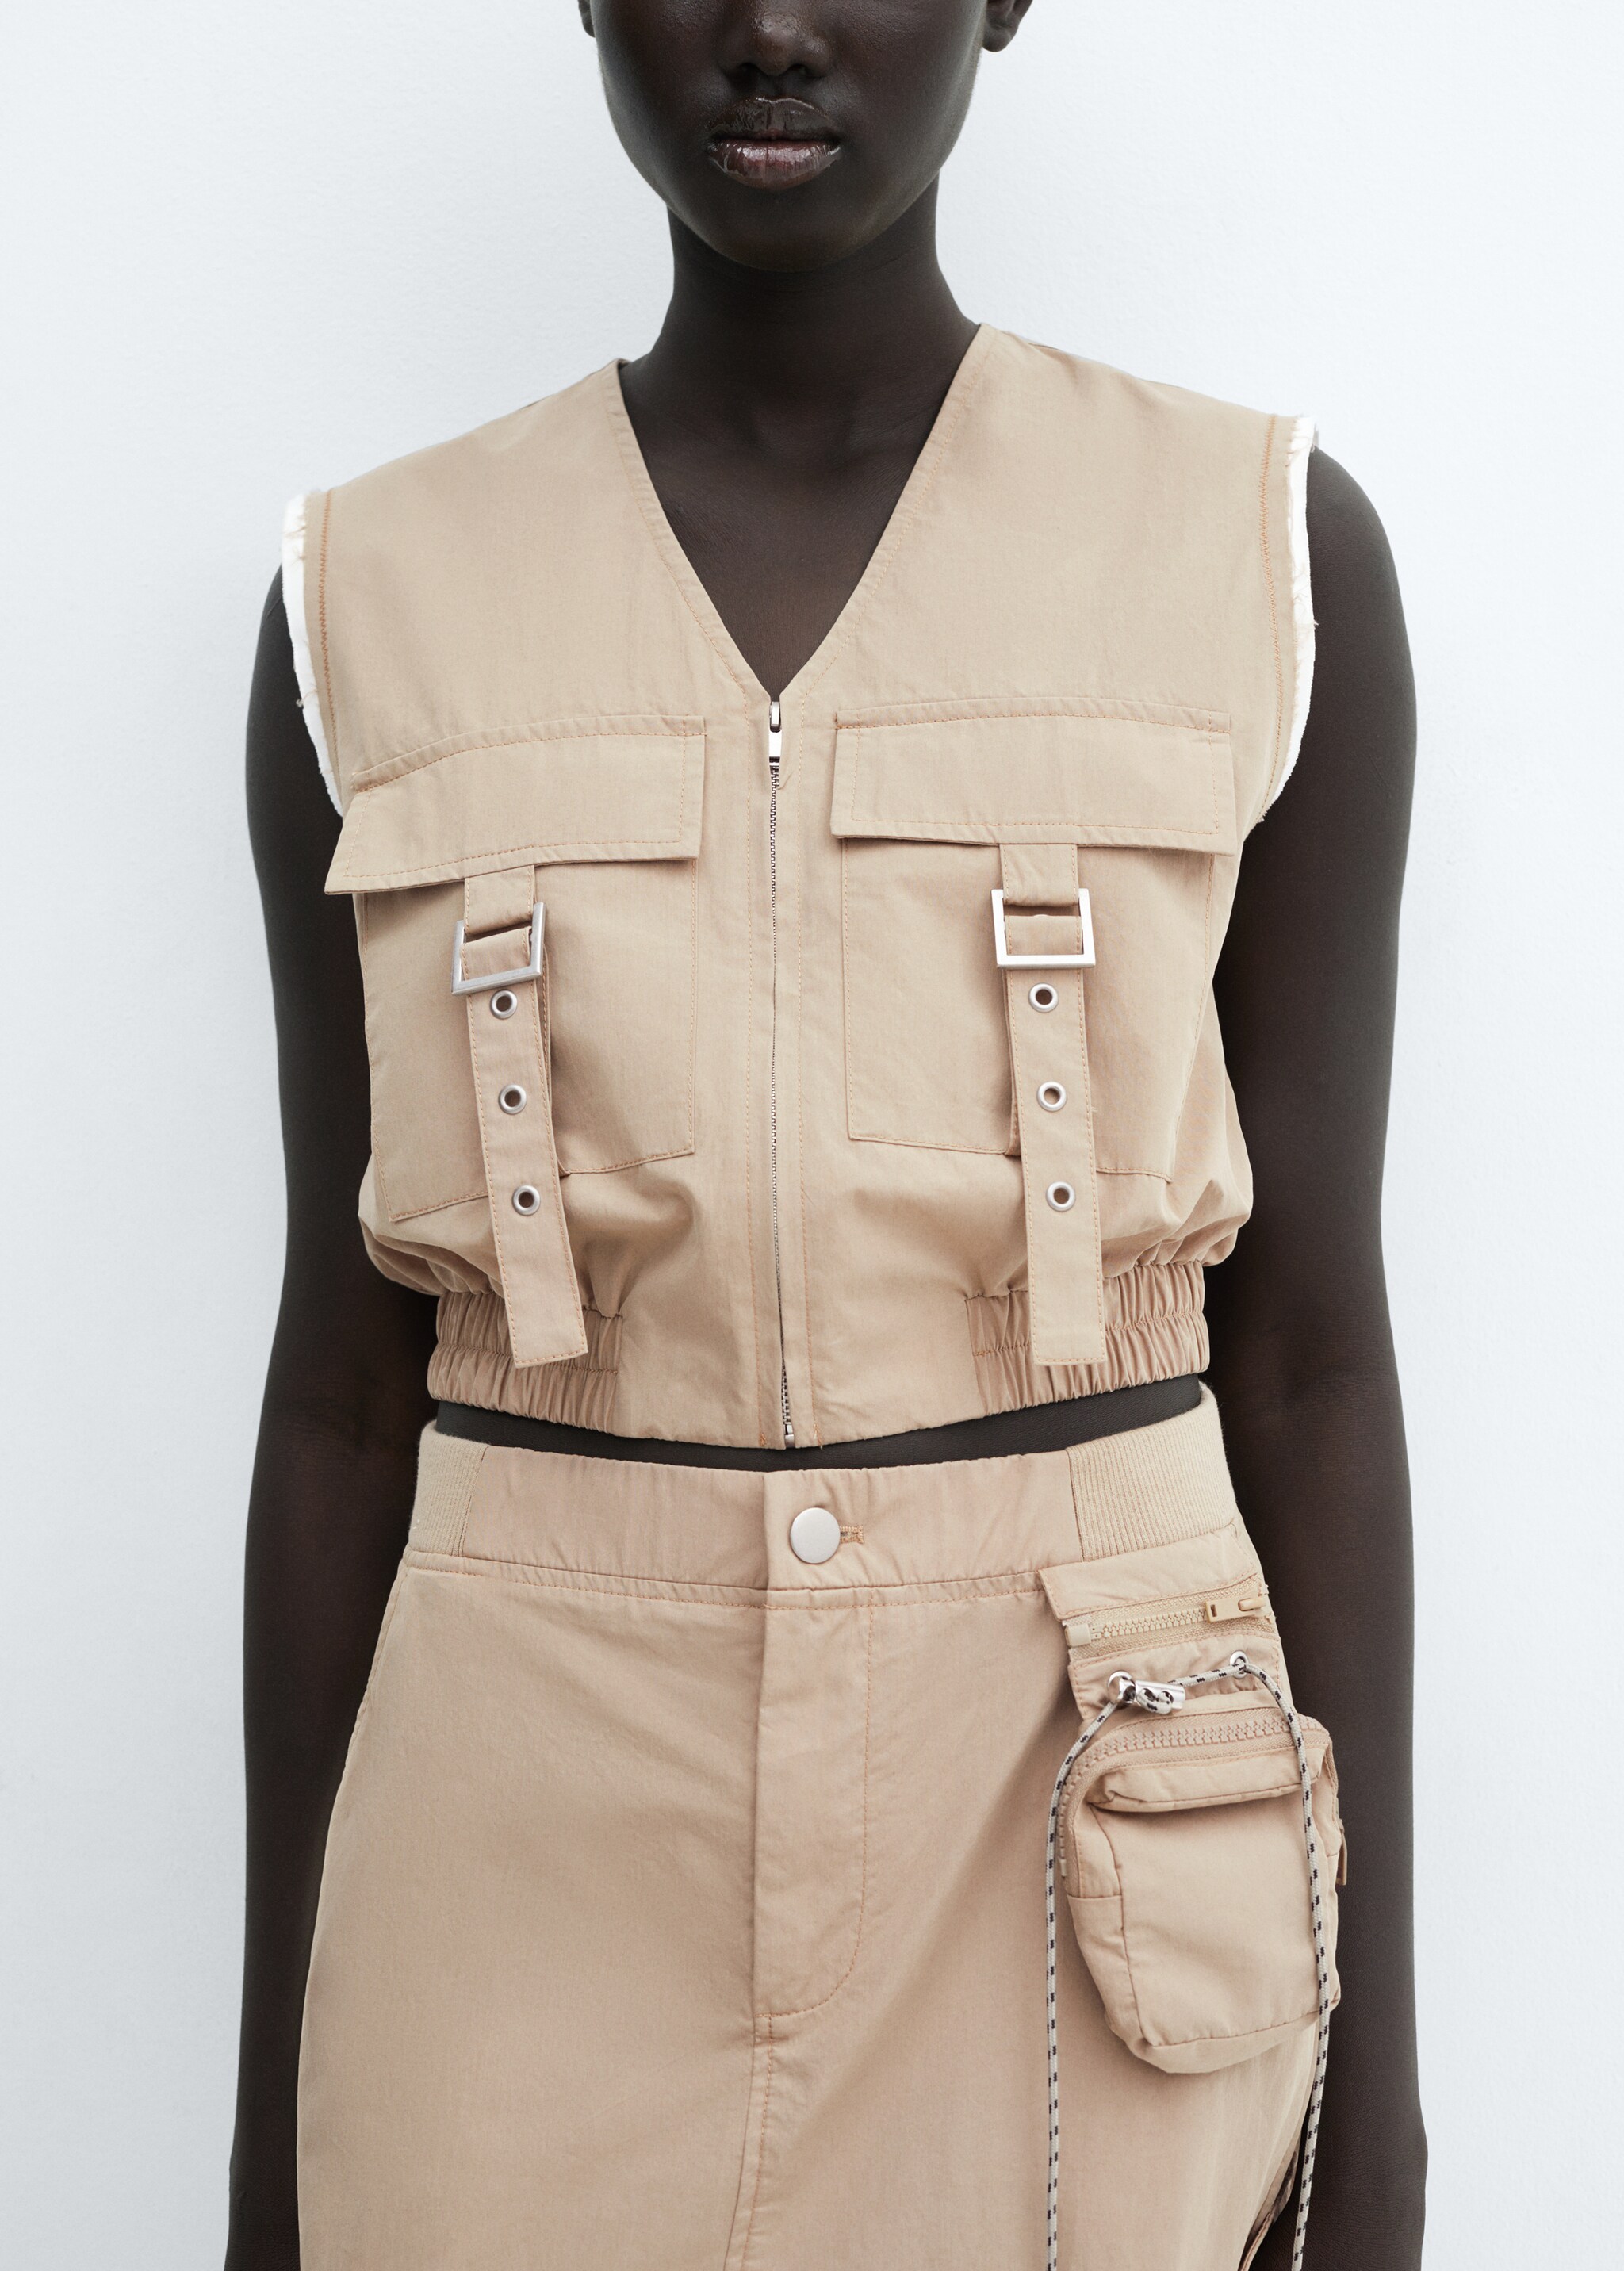 Vest with cargo pockets - Details of the article 6